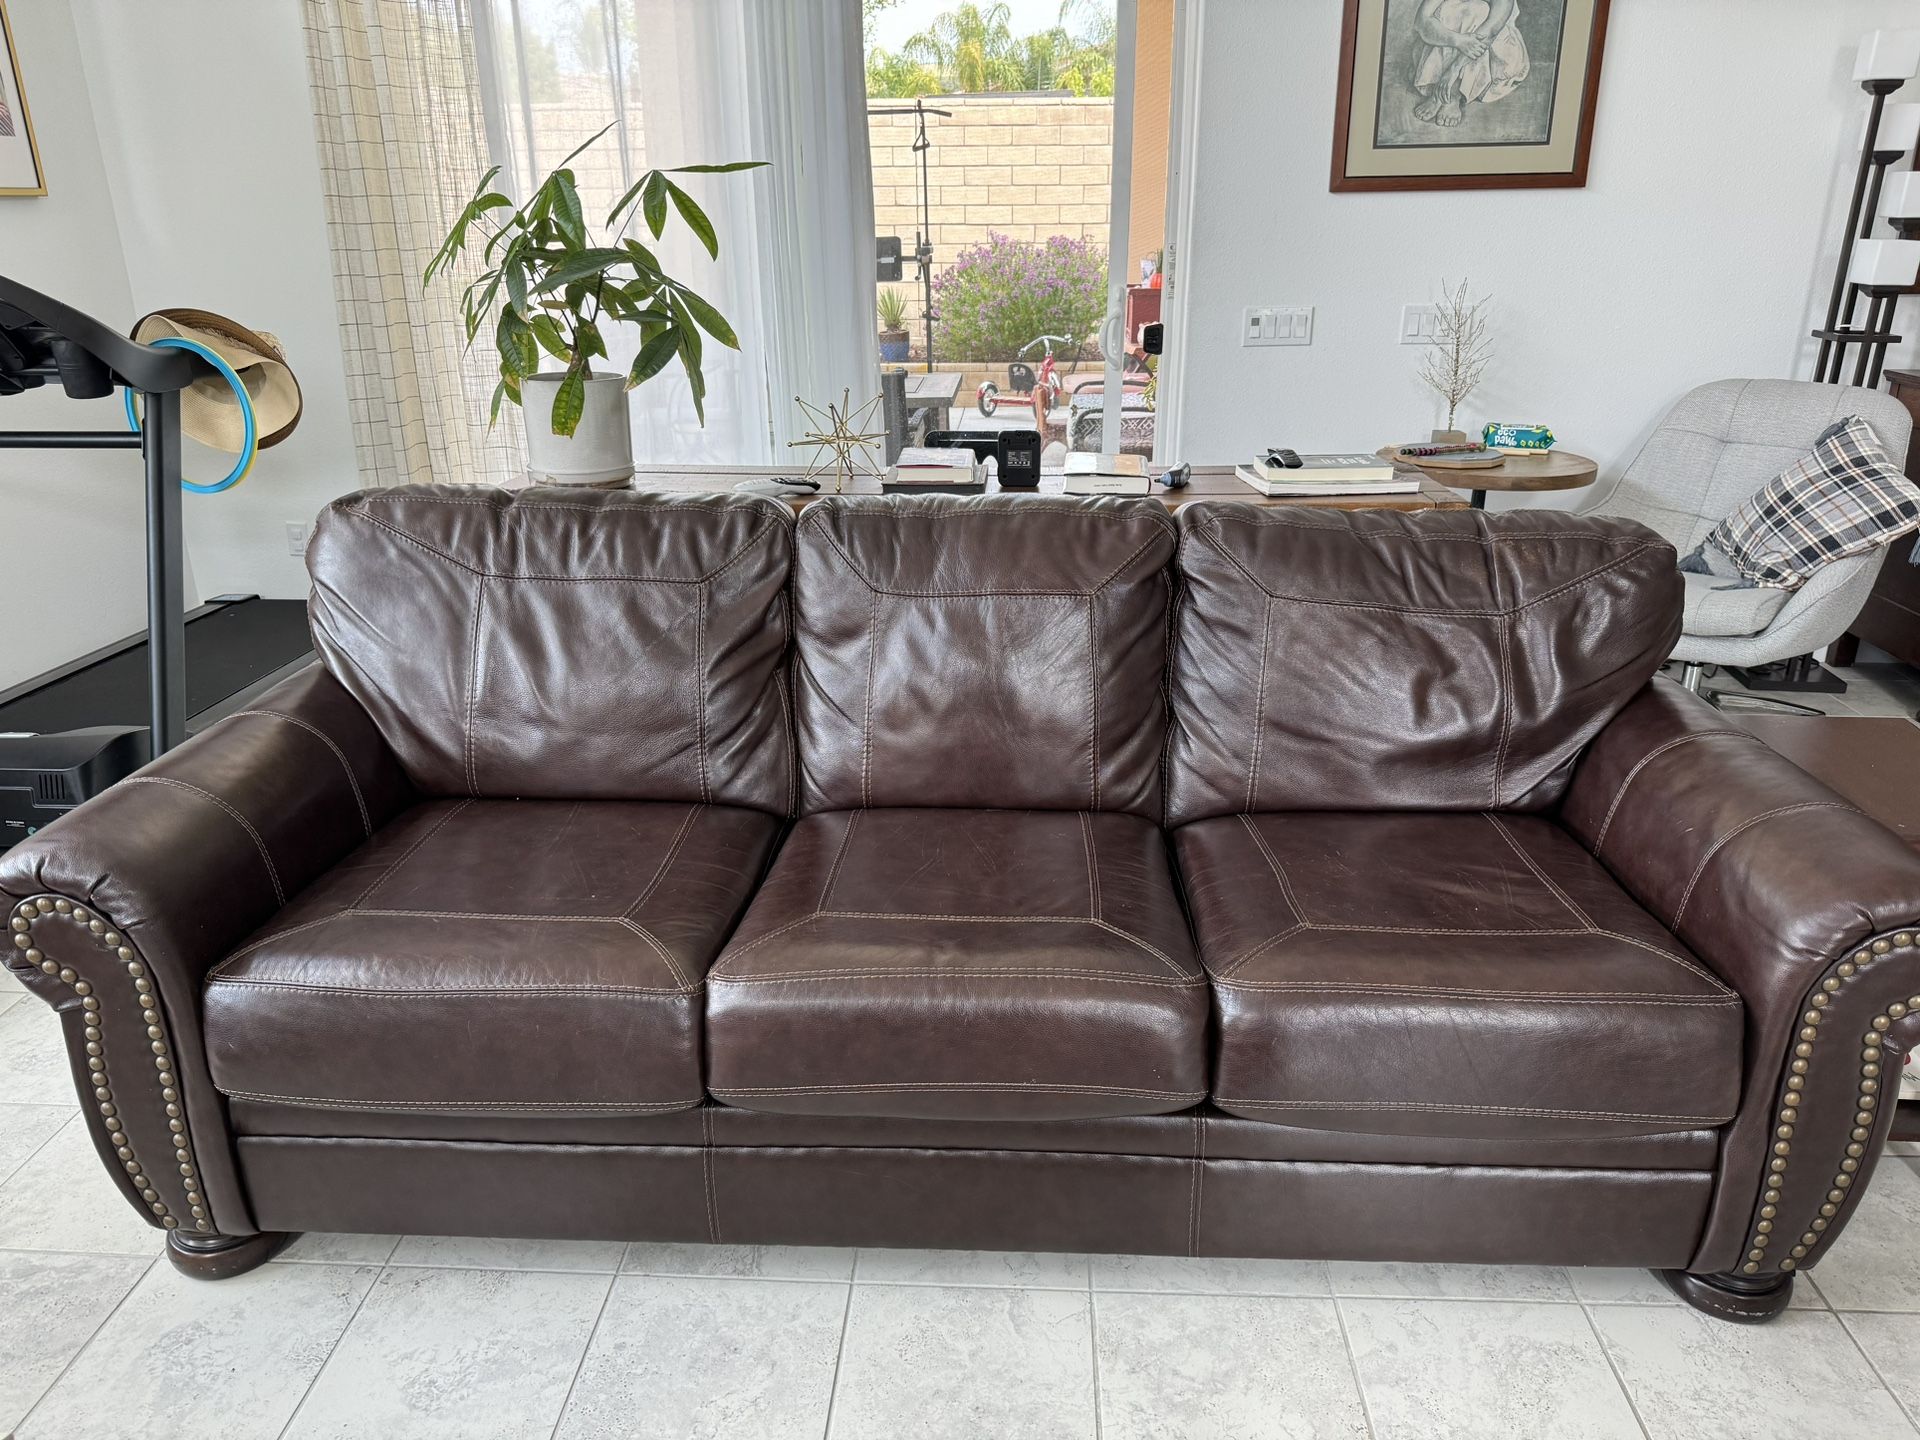 Leather Couch $200